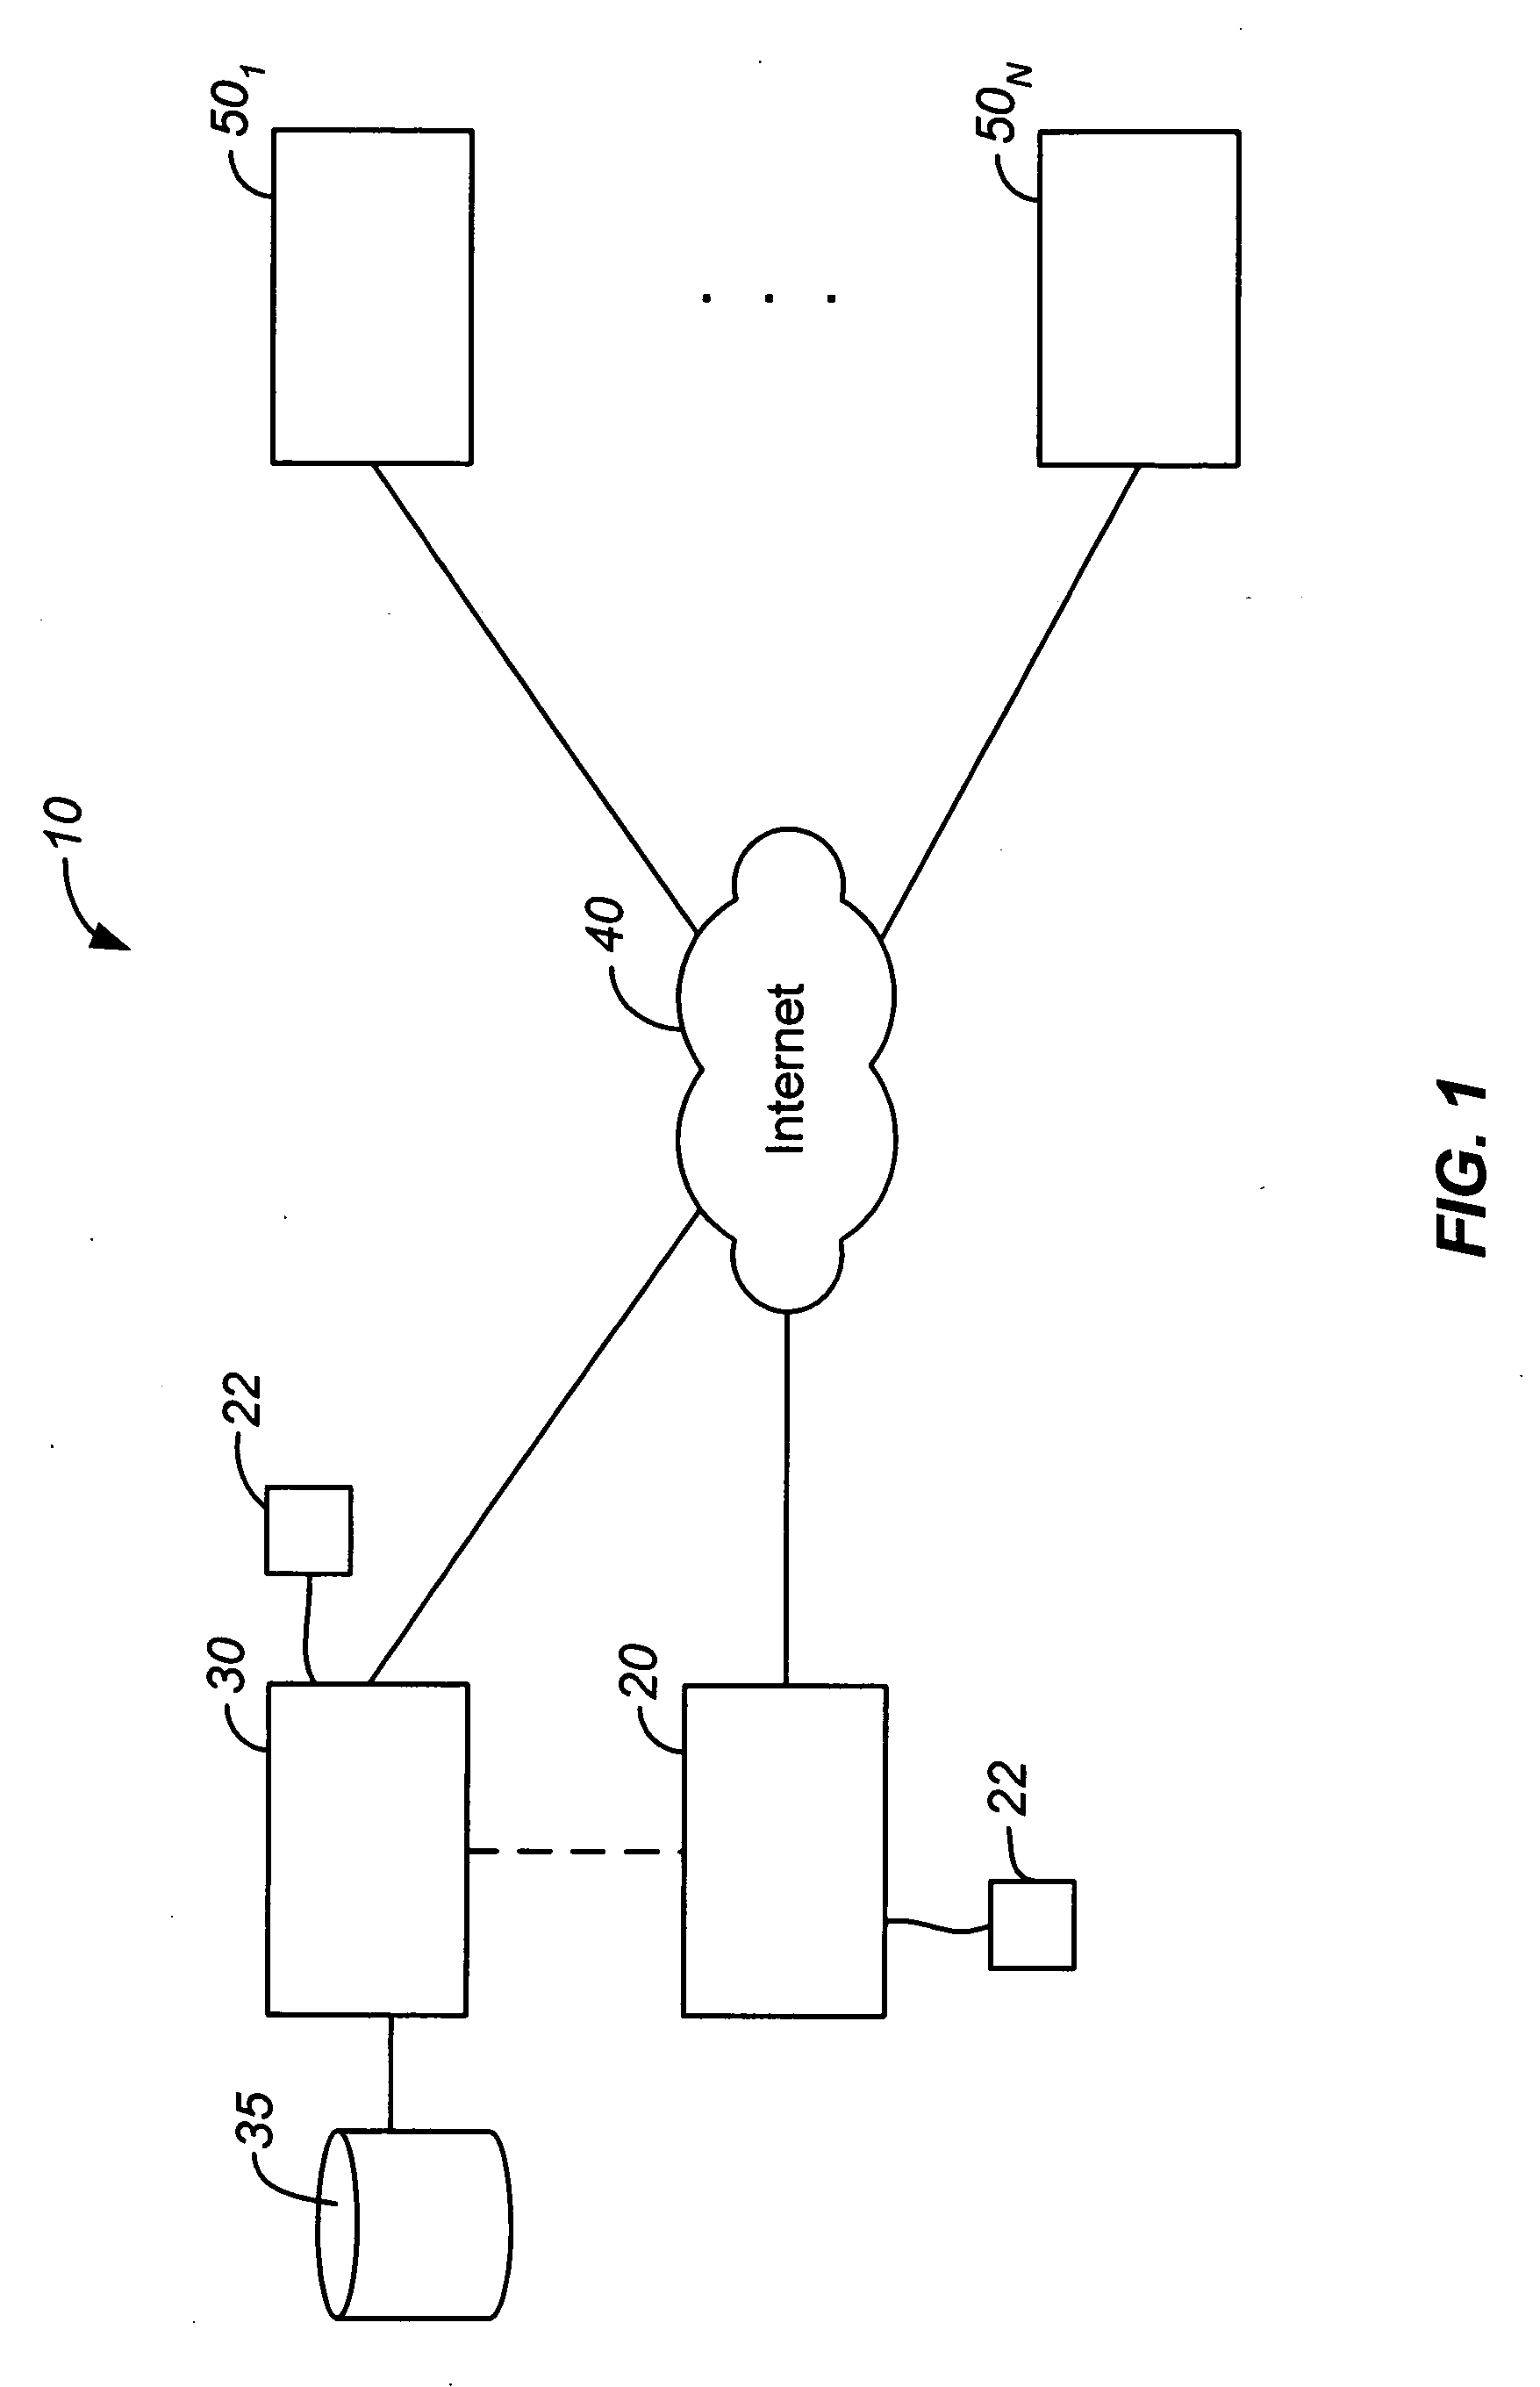 Systems and methods for identifying and extracting data from HTML pages